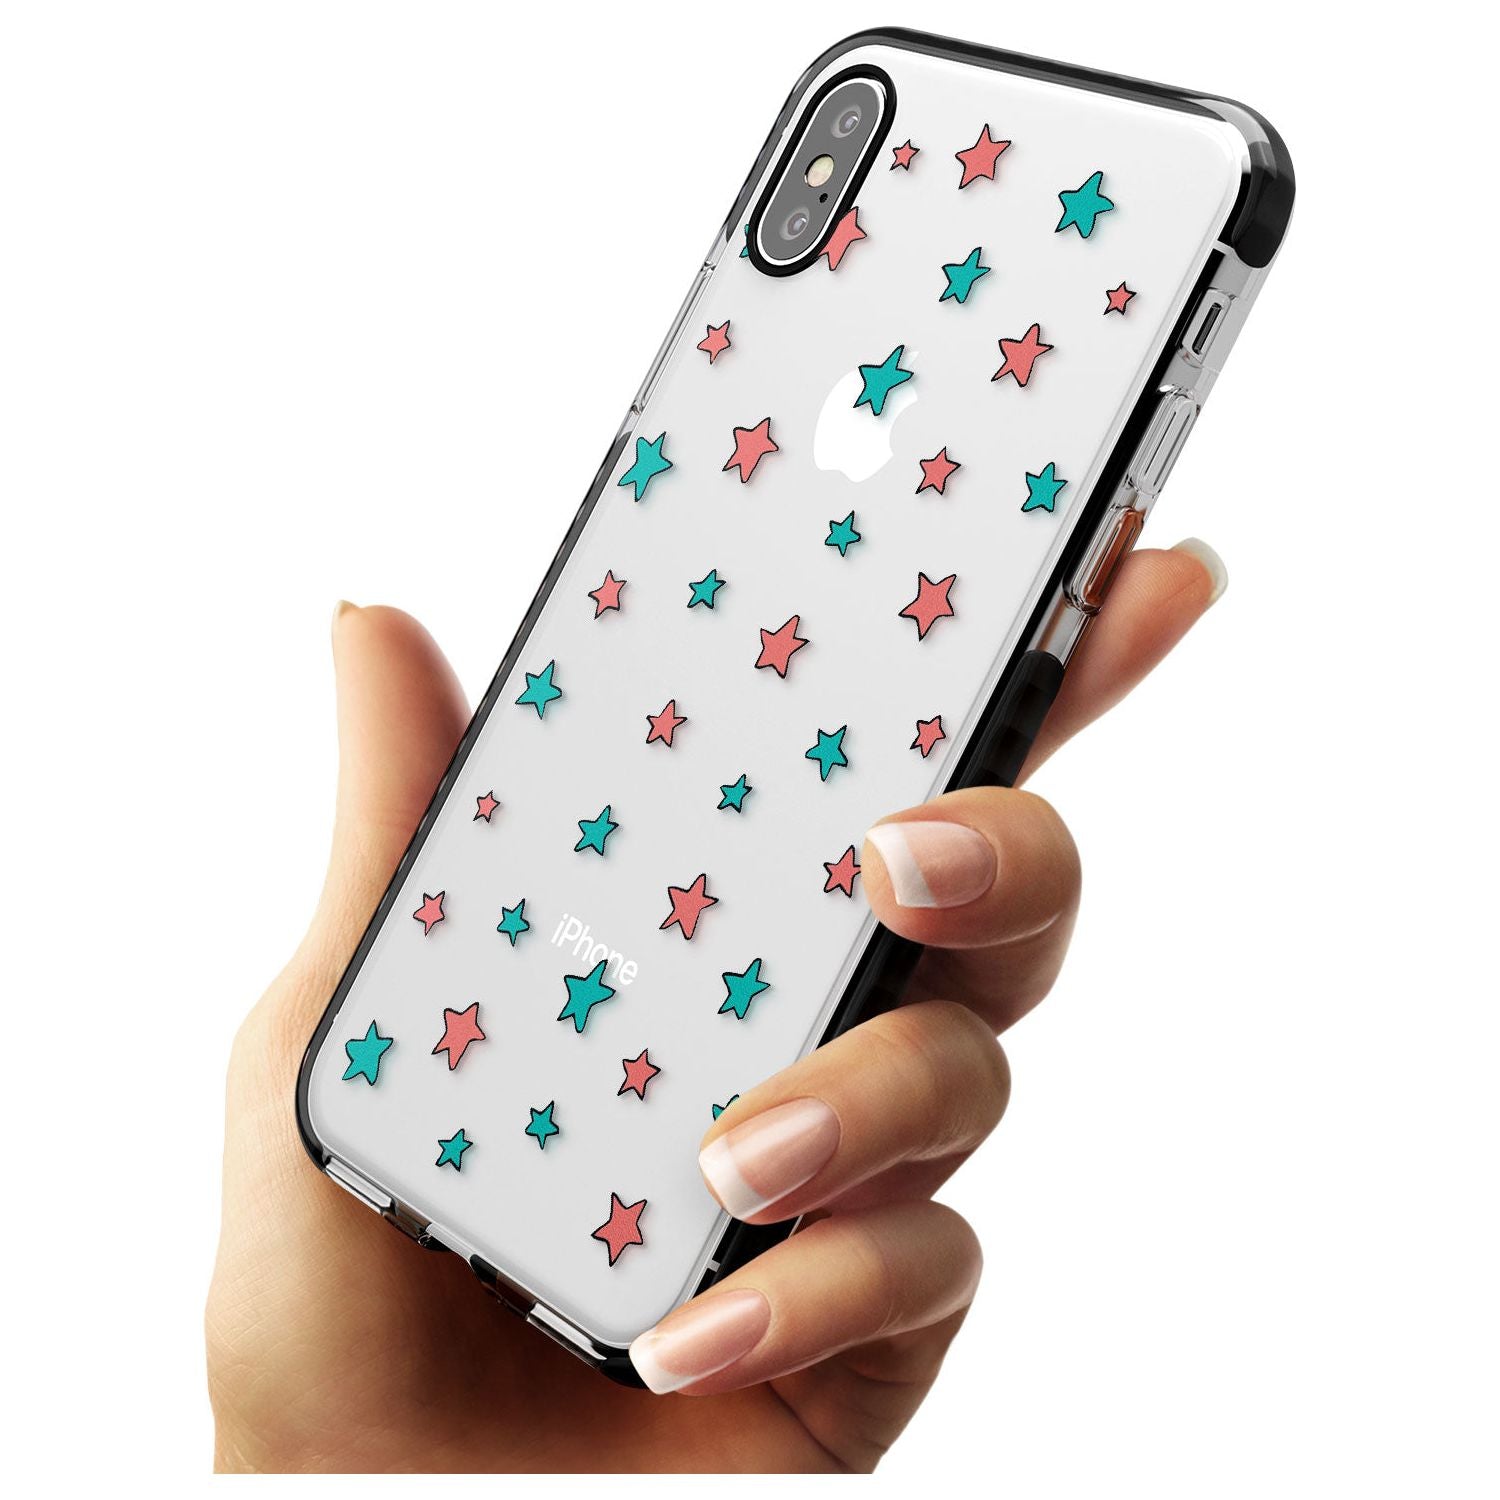 Heartstopper Stars Pattern Black Impact Phone Case for iPhone X XS Max XR